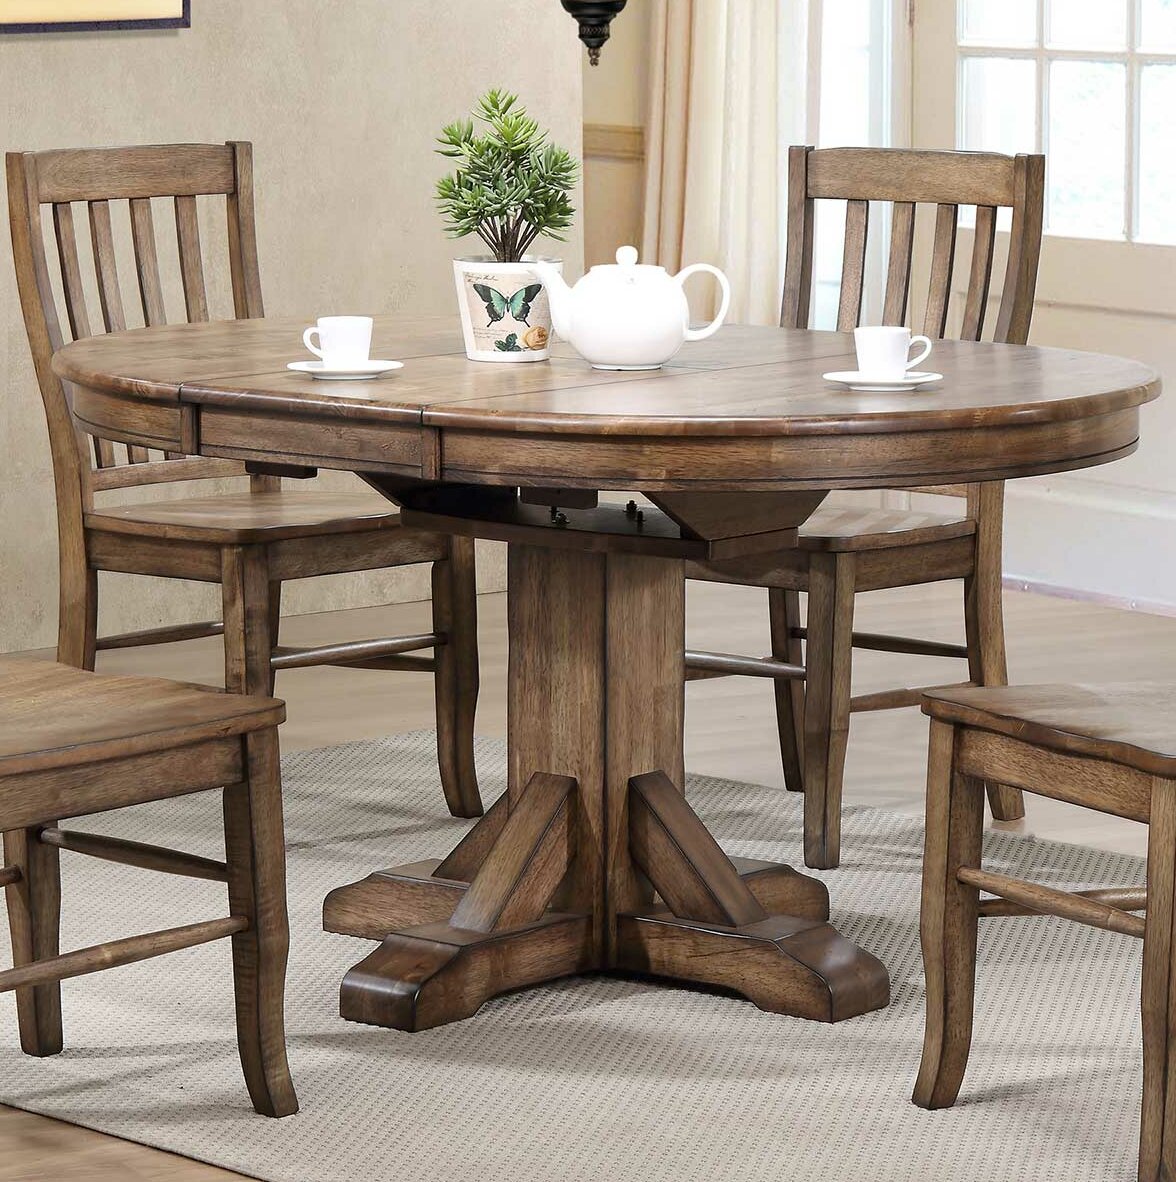 Rosecliff Heights Rutledge Extendable Rubberwood Solid Wood Dining Table Reviews Wayfair